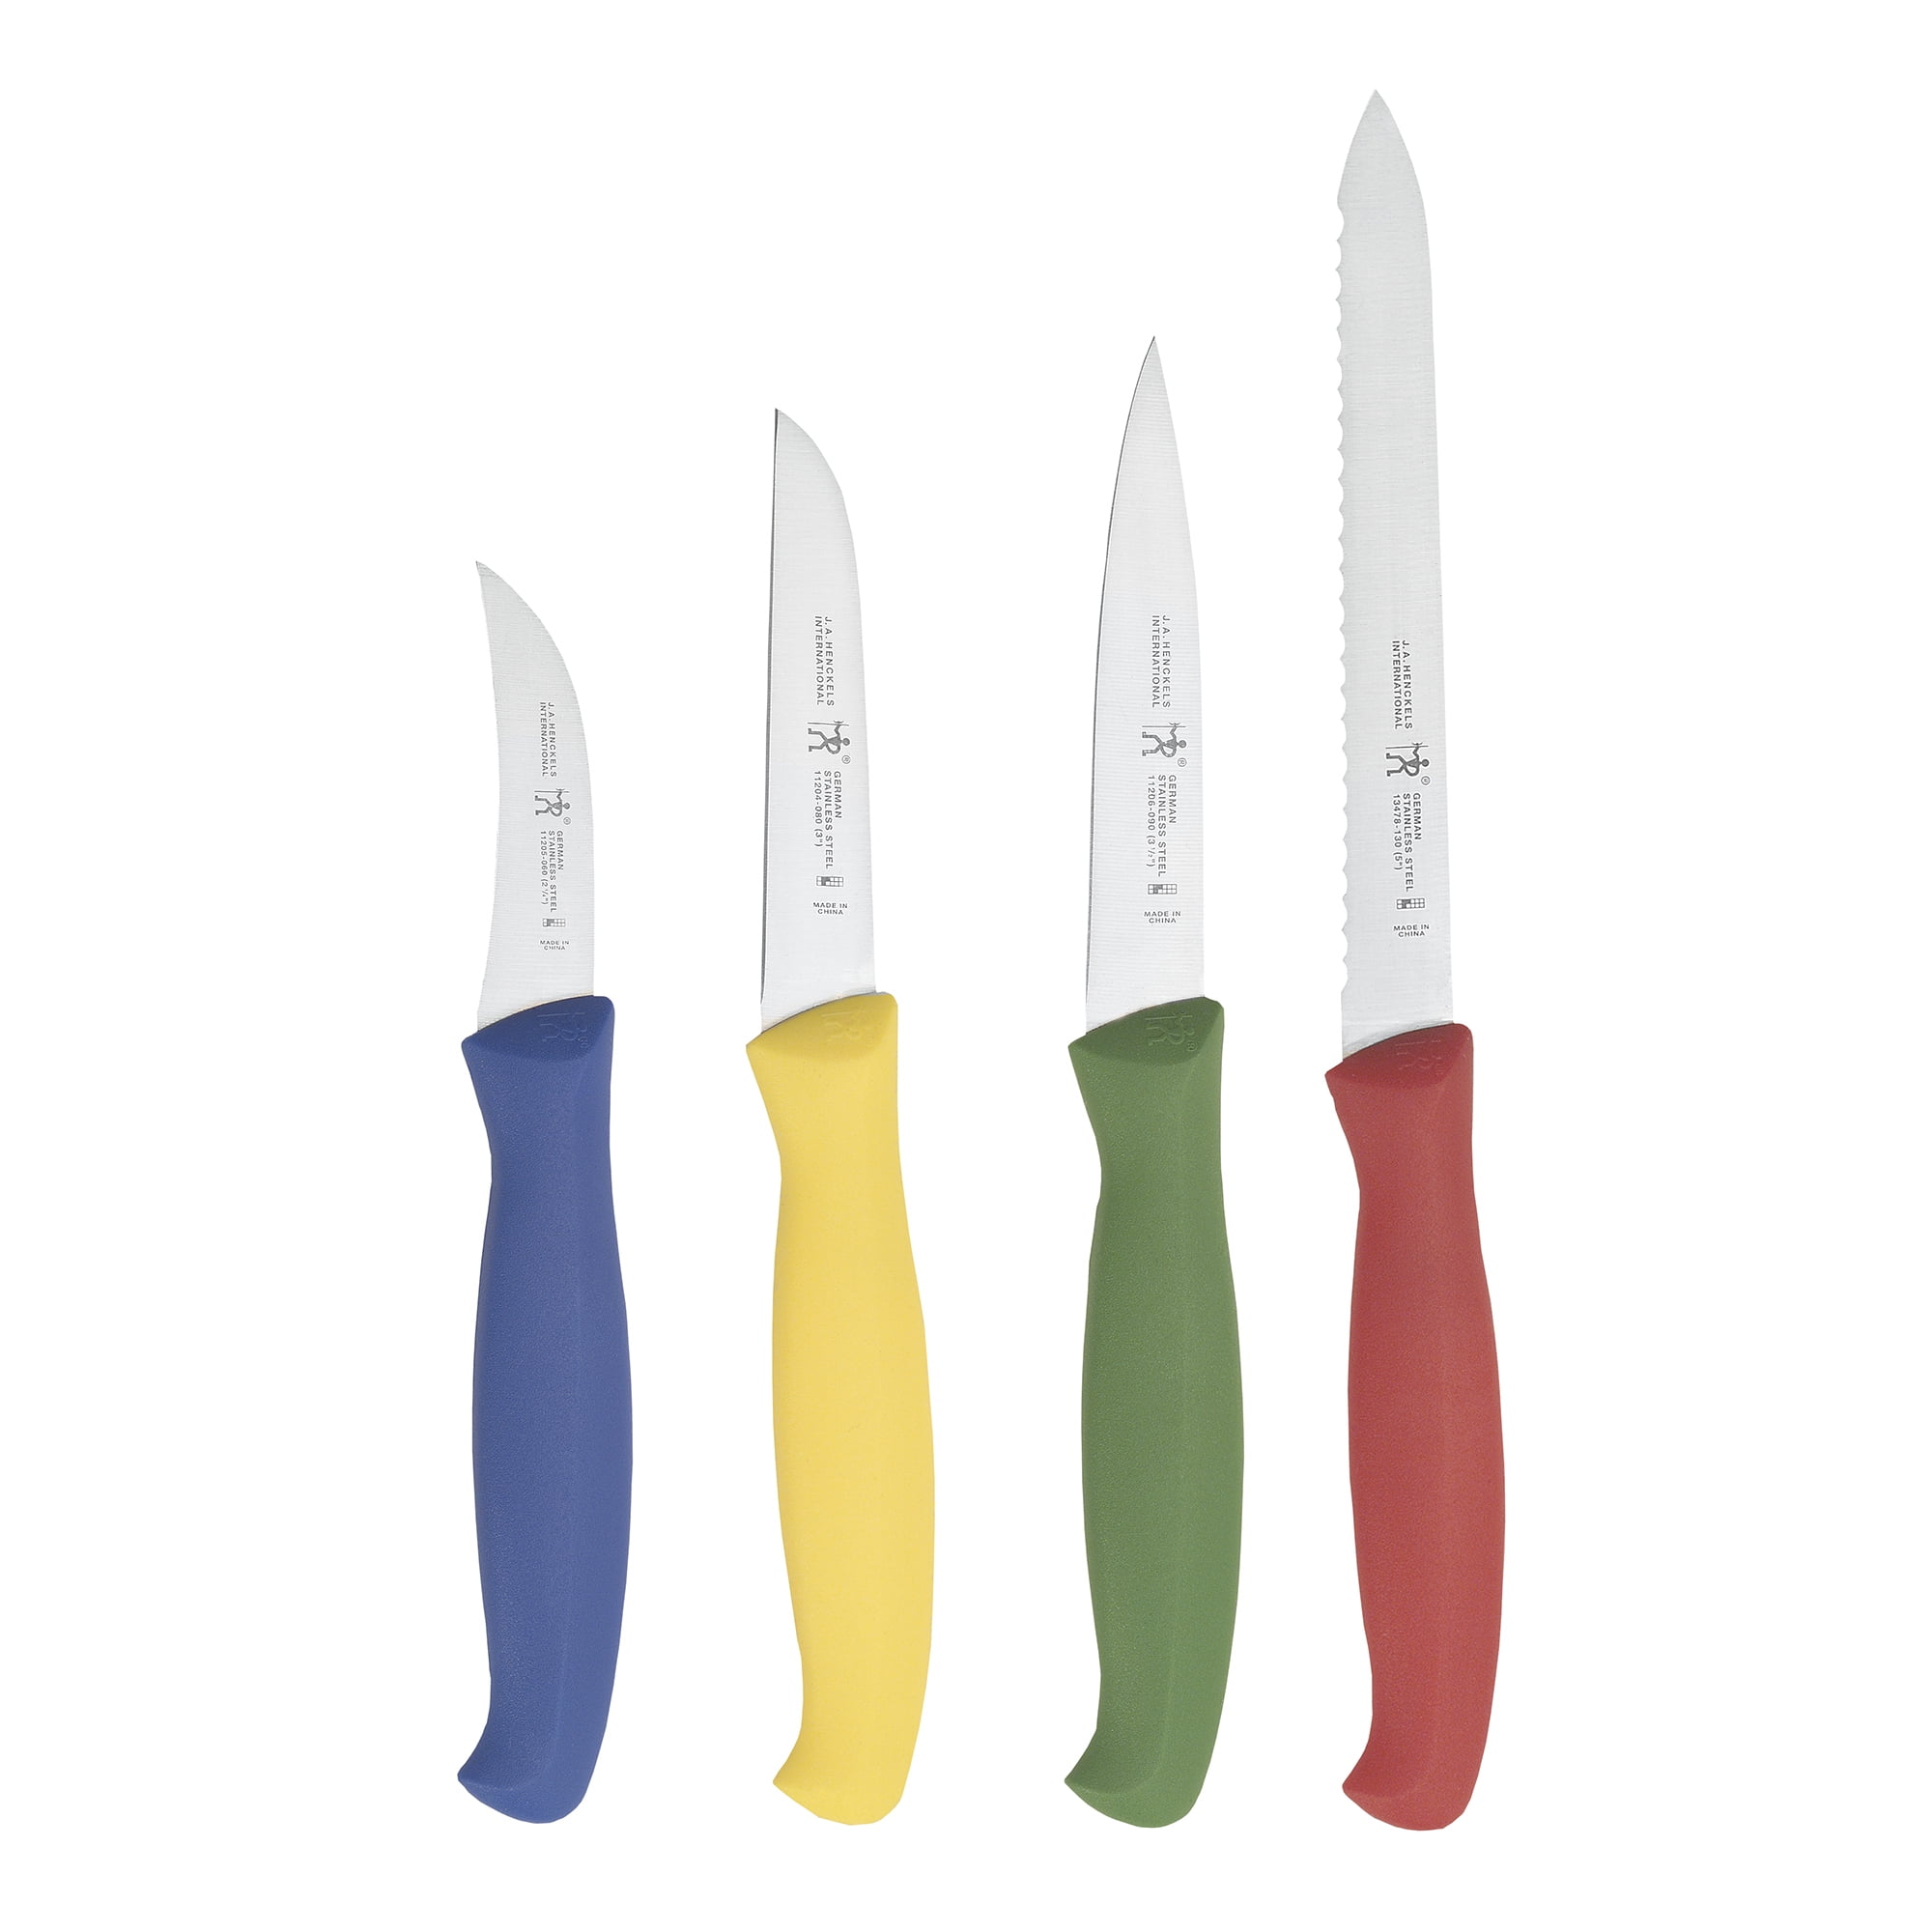 6669634 Stainless Steel Knife Set - 4 Piece